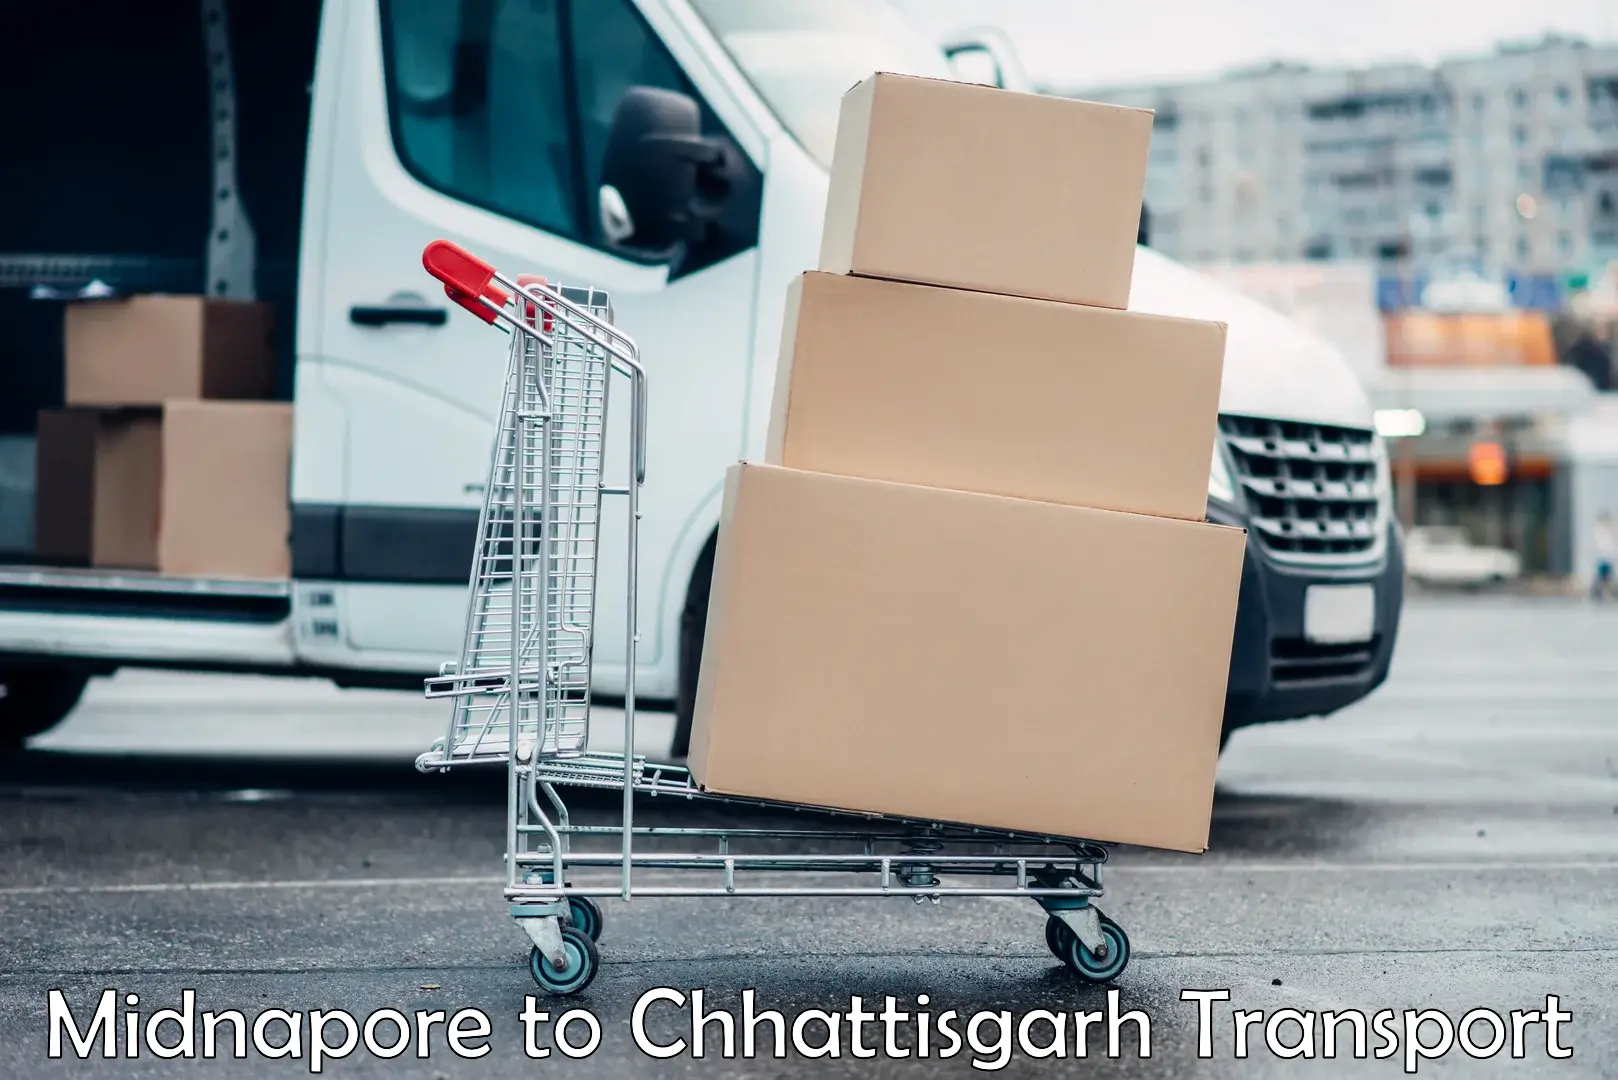 Goods delivery service Midnapore to Dhamtari